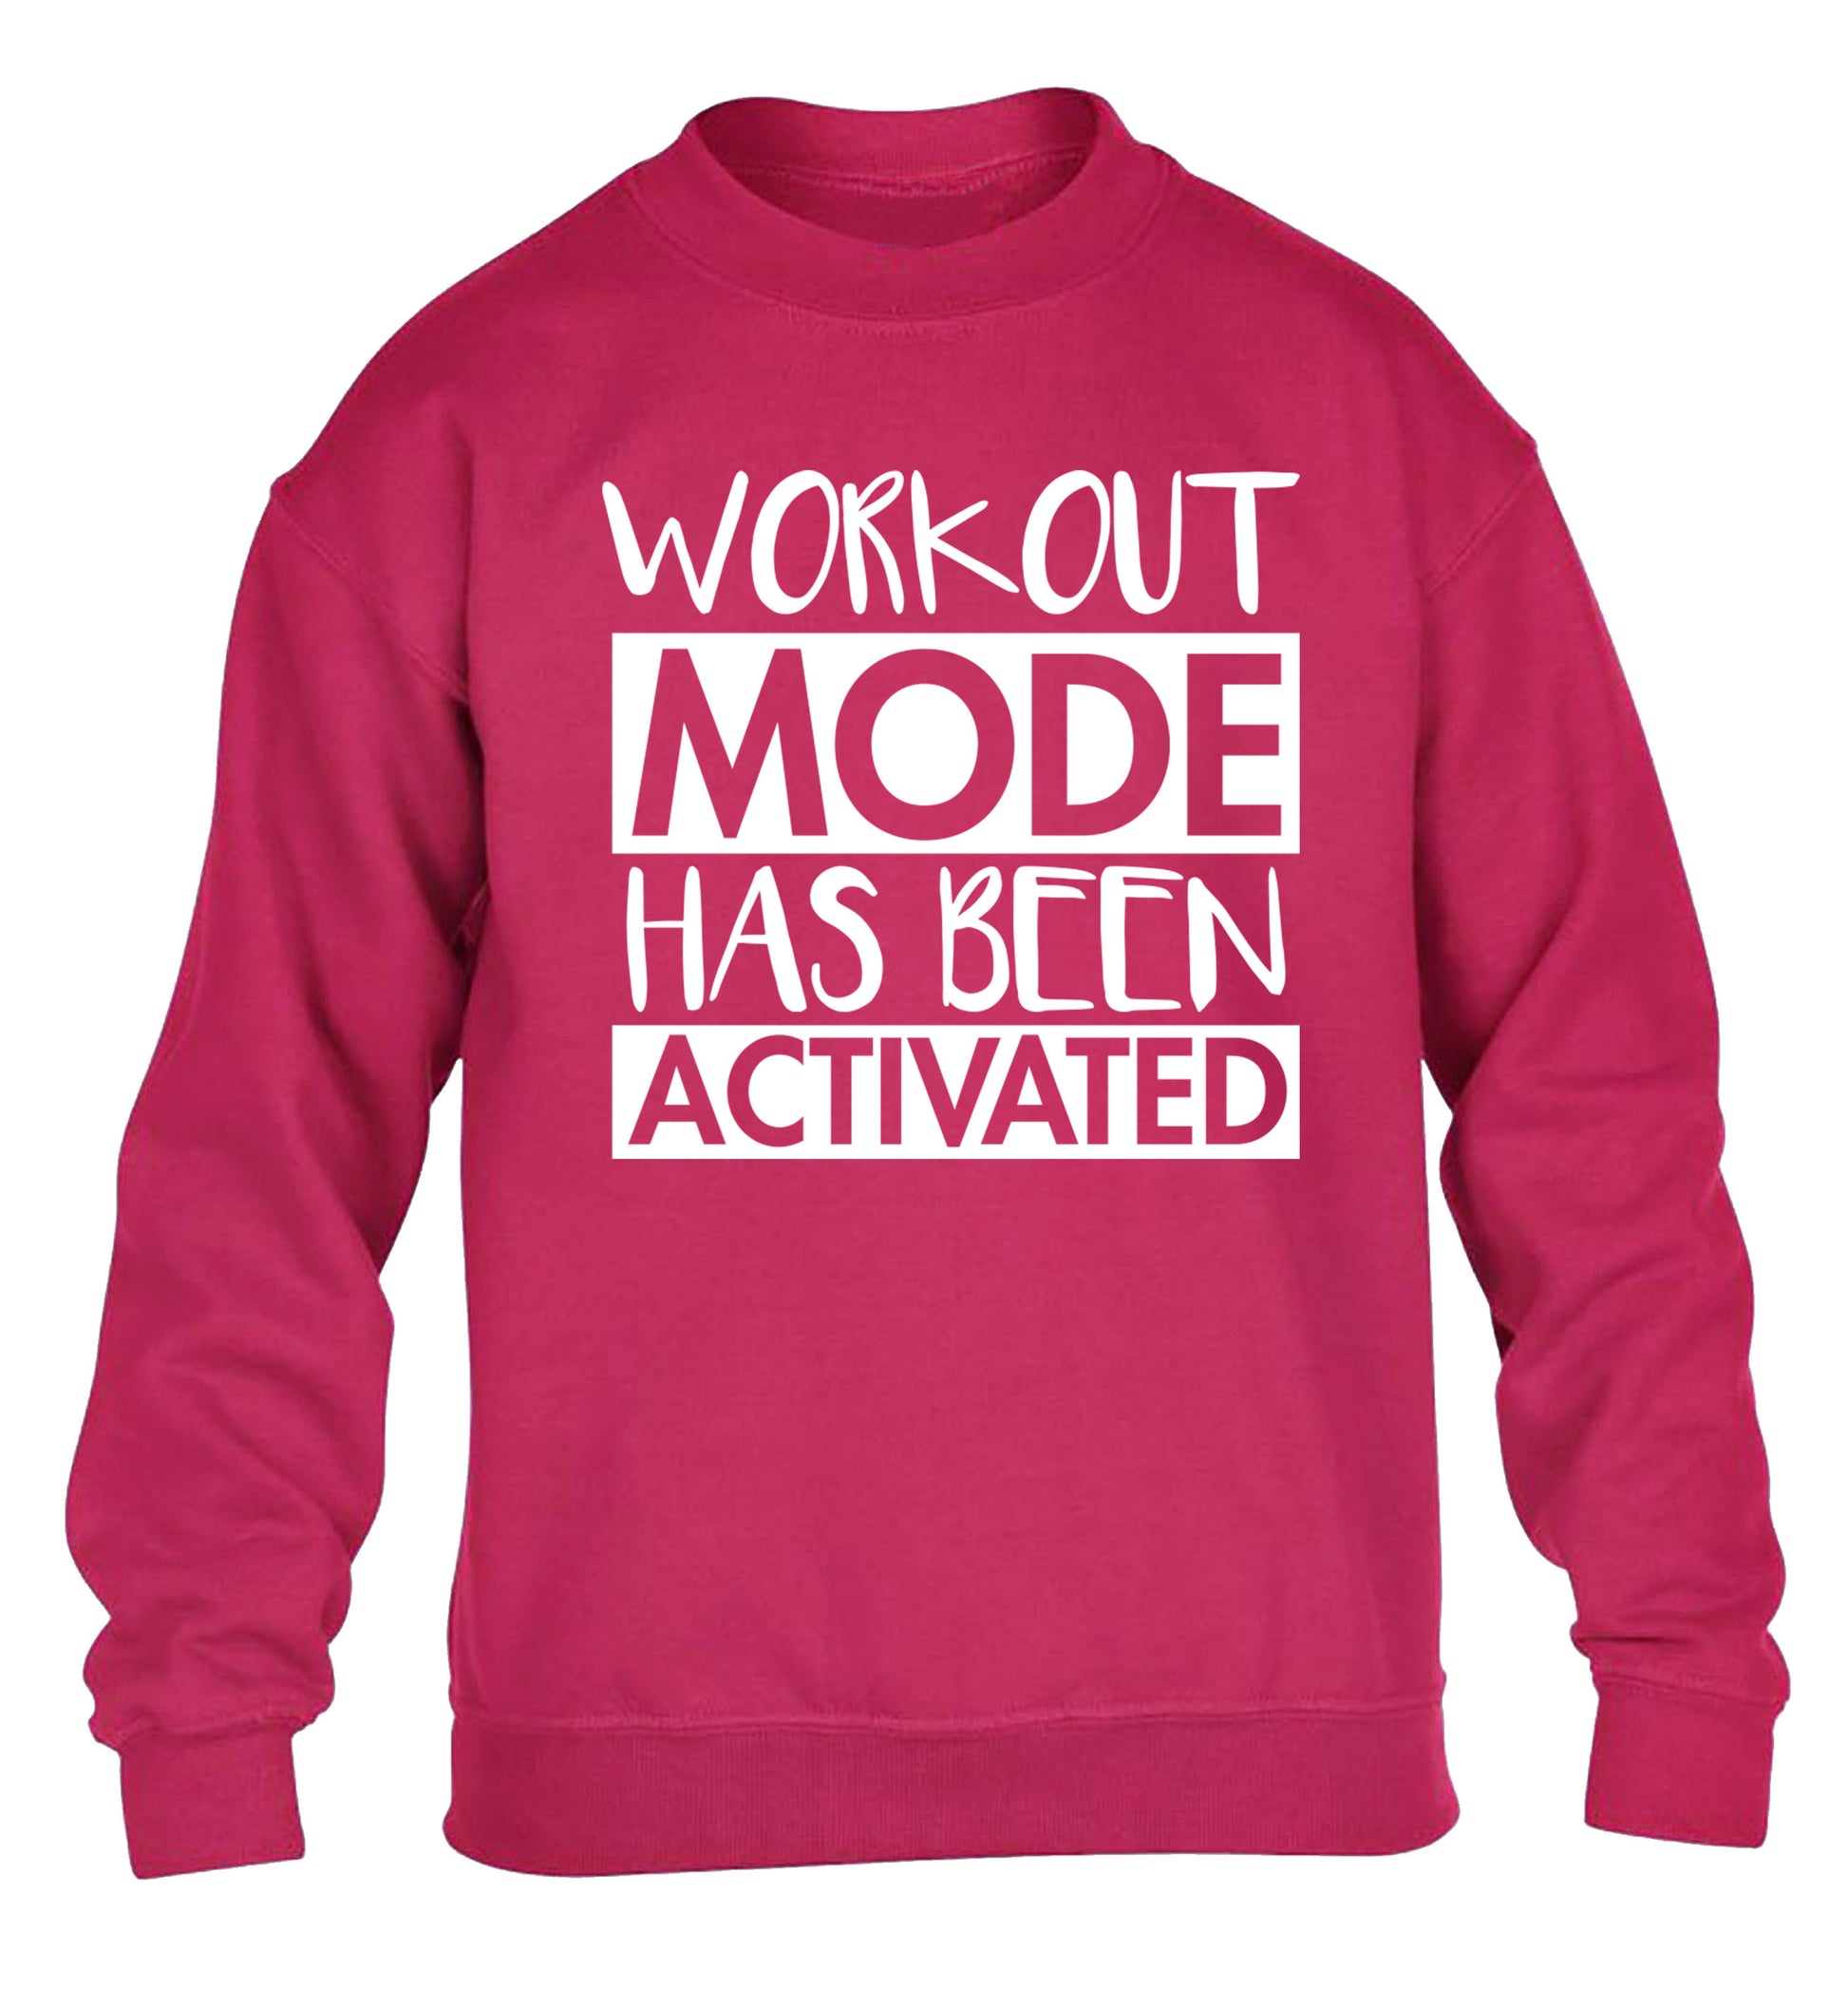 Workout mode has been activated children's pink sweater 12-14 Years